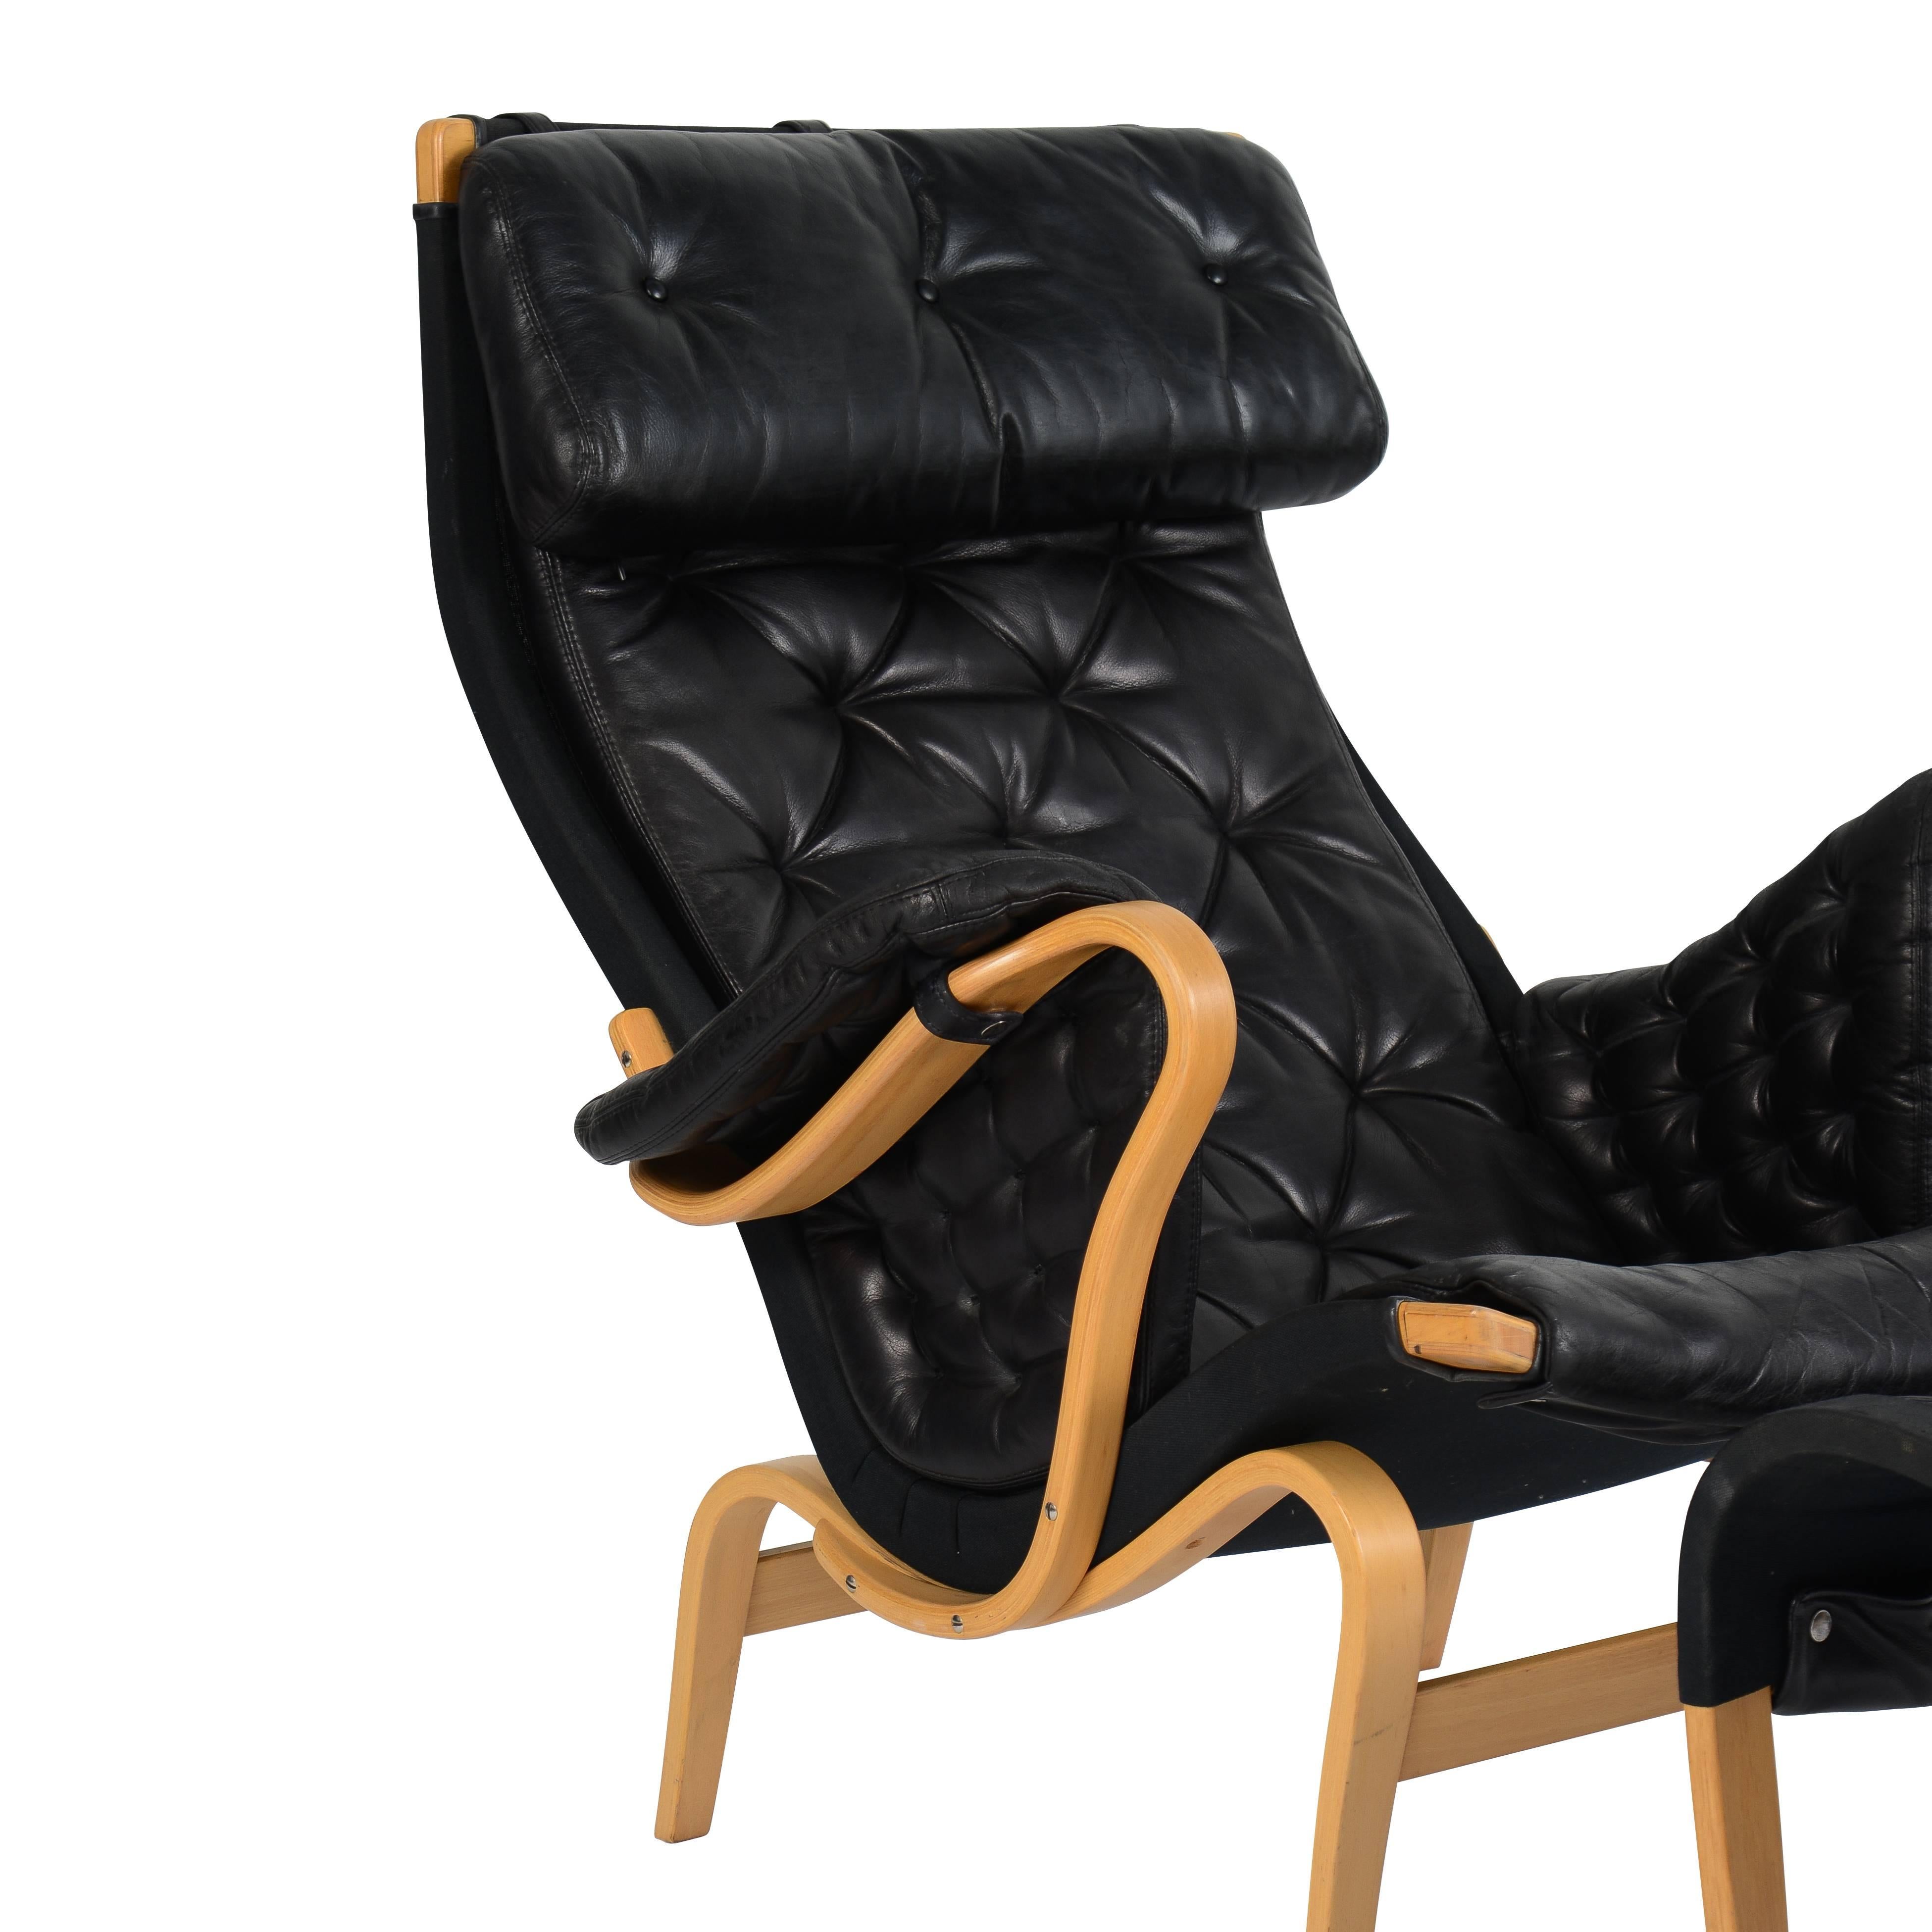 Bent beechwood armchair and ottoman upholstered in black leather.
         